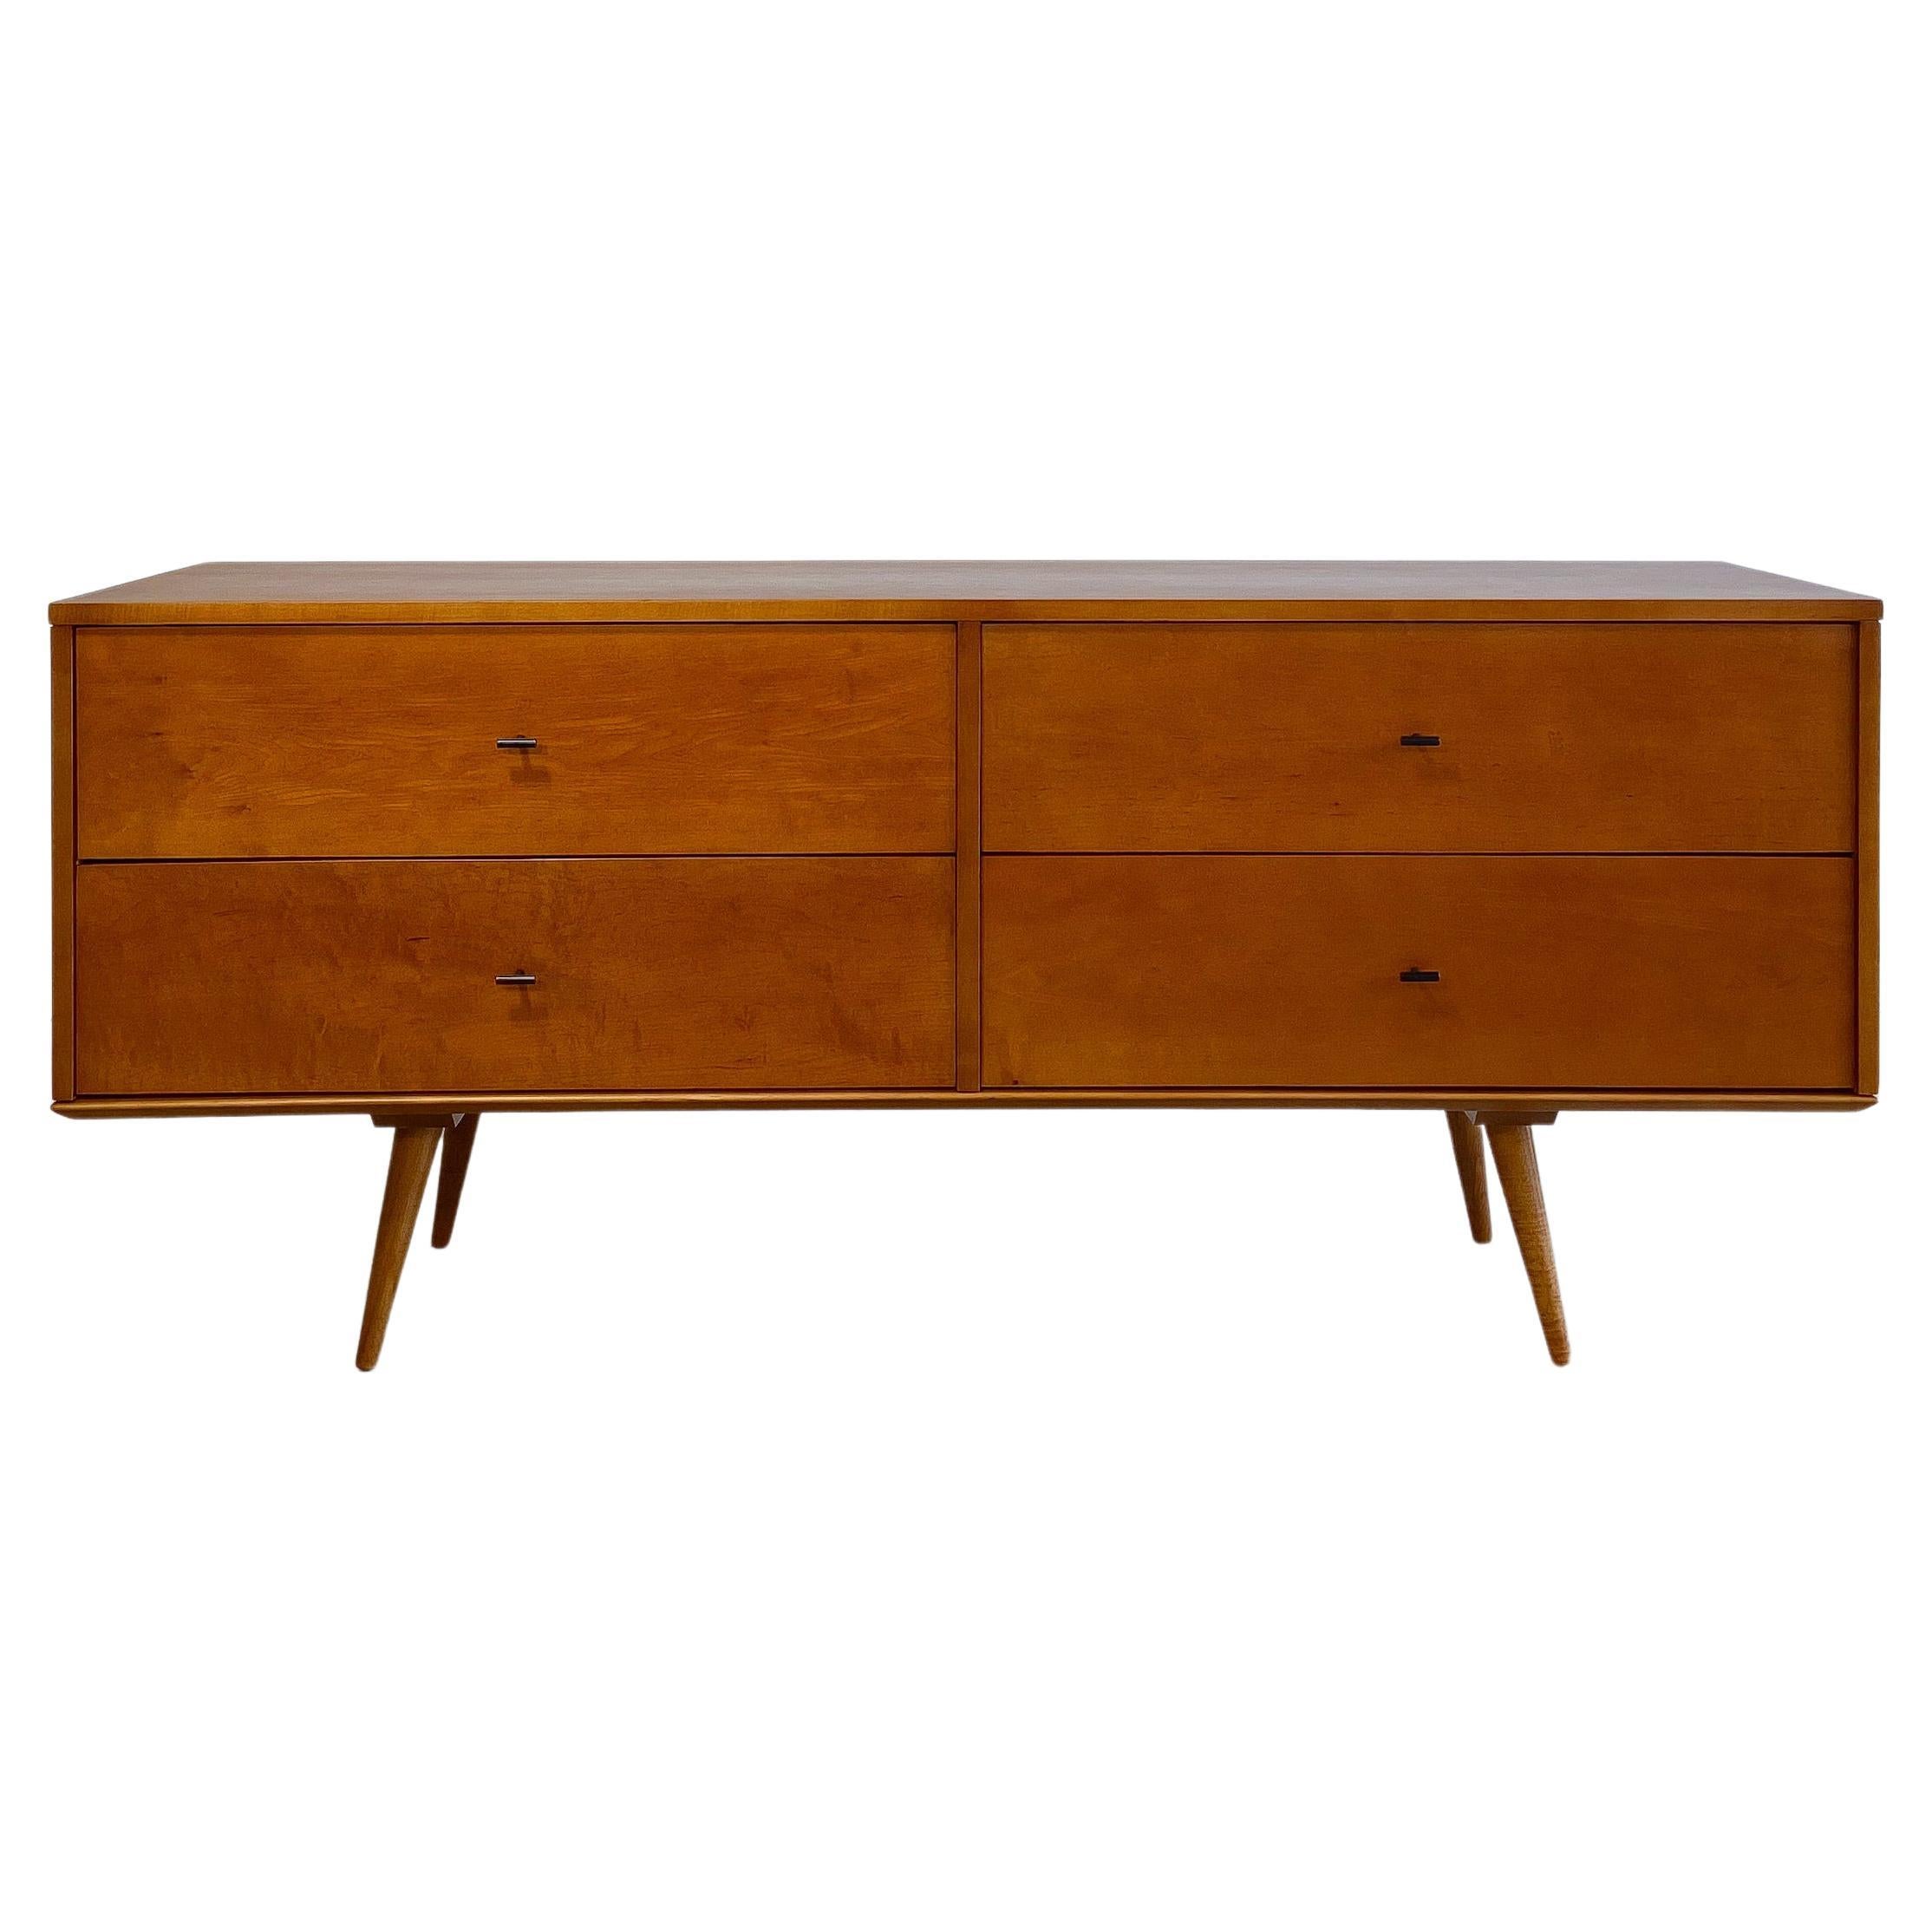 Paul McCobb Low Credenza or Dresser, Planner Group, 1950s For Sale